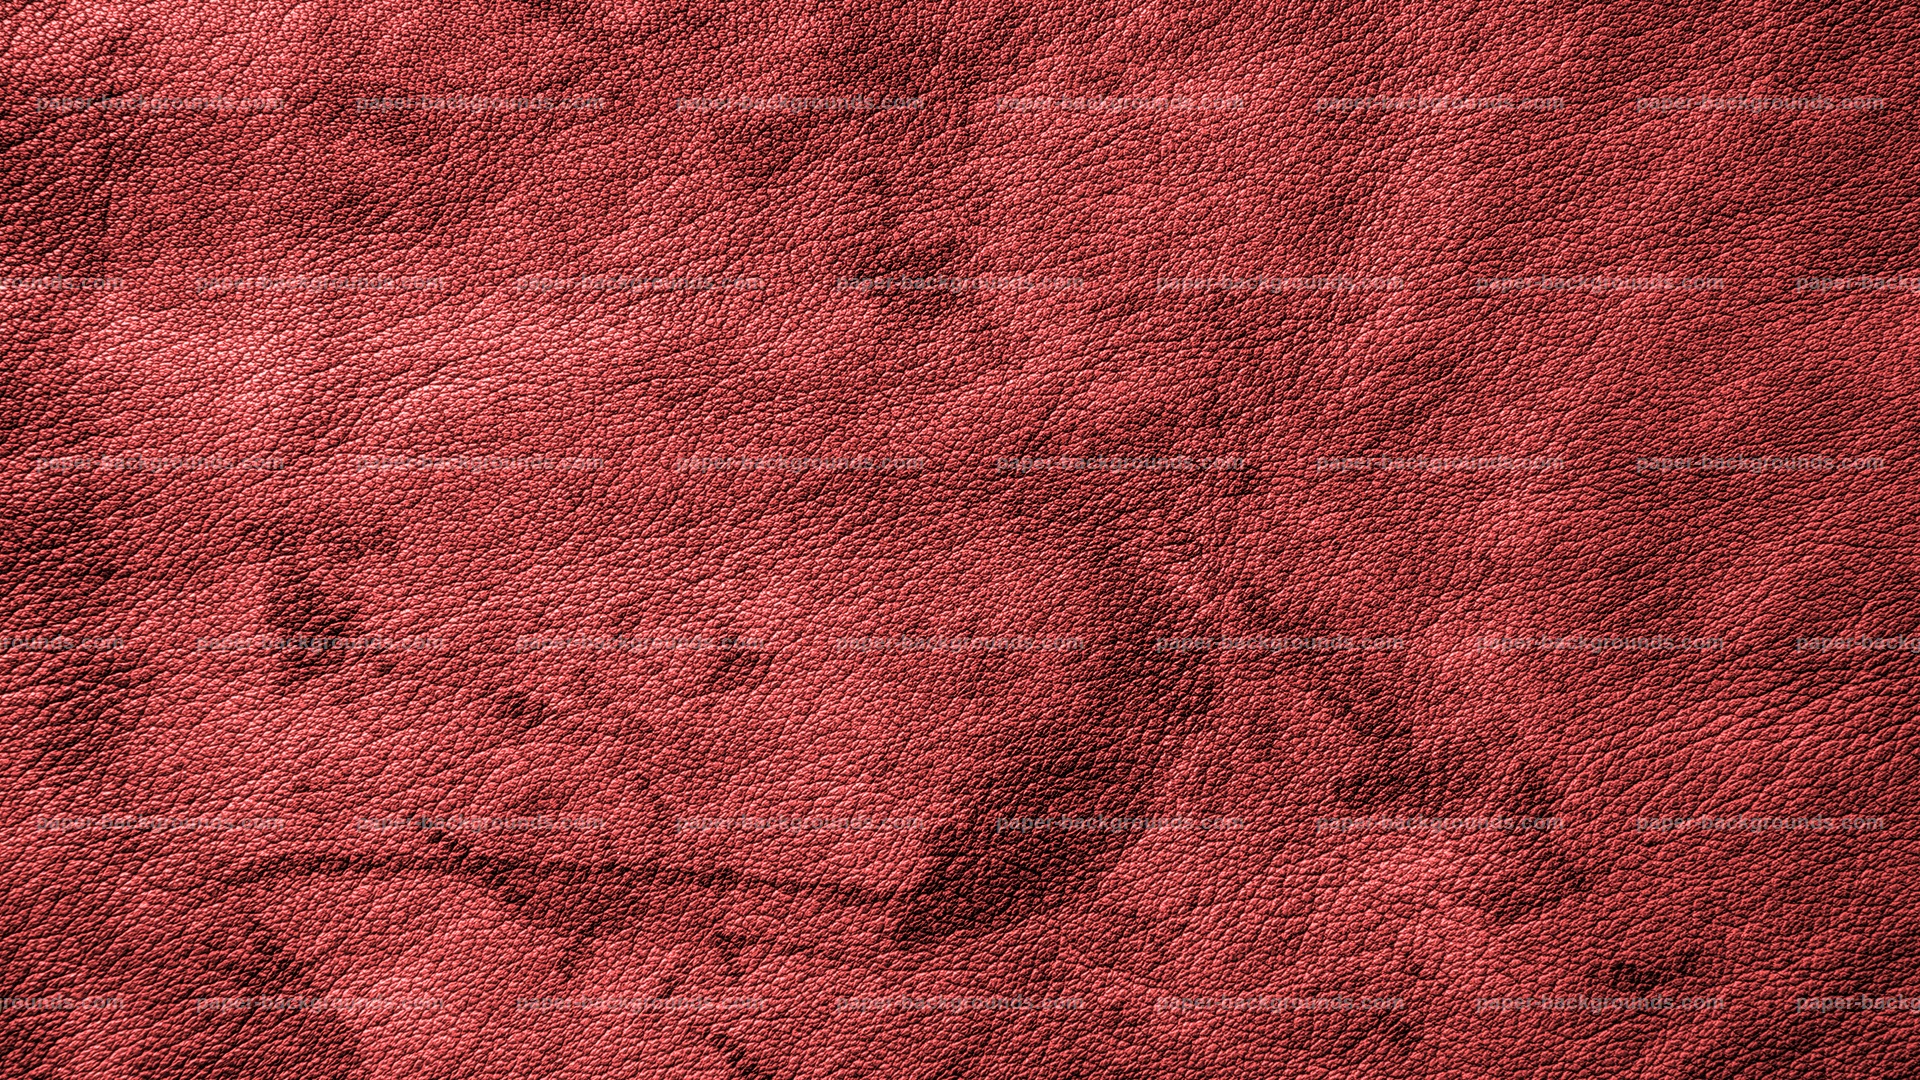 Red Grunge Leather Texture Background Paper Background